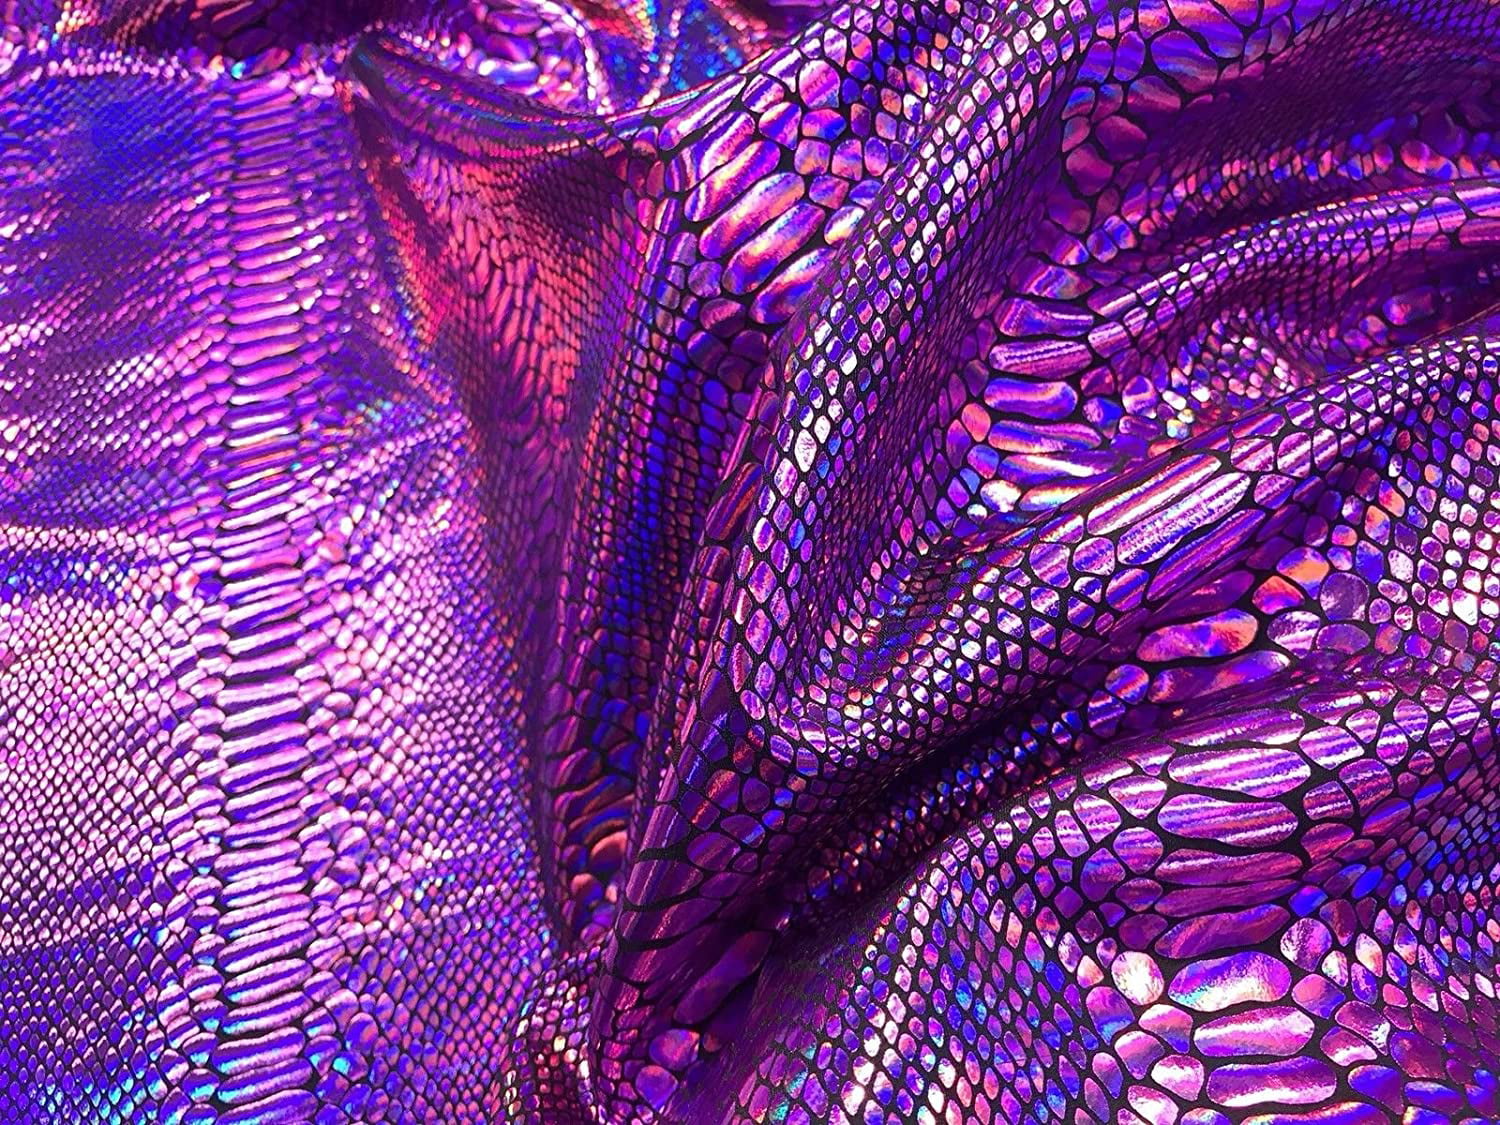 Light purple Iridescent Snake Print on Nylon Spandex four way stretch Fabric sold by the yard